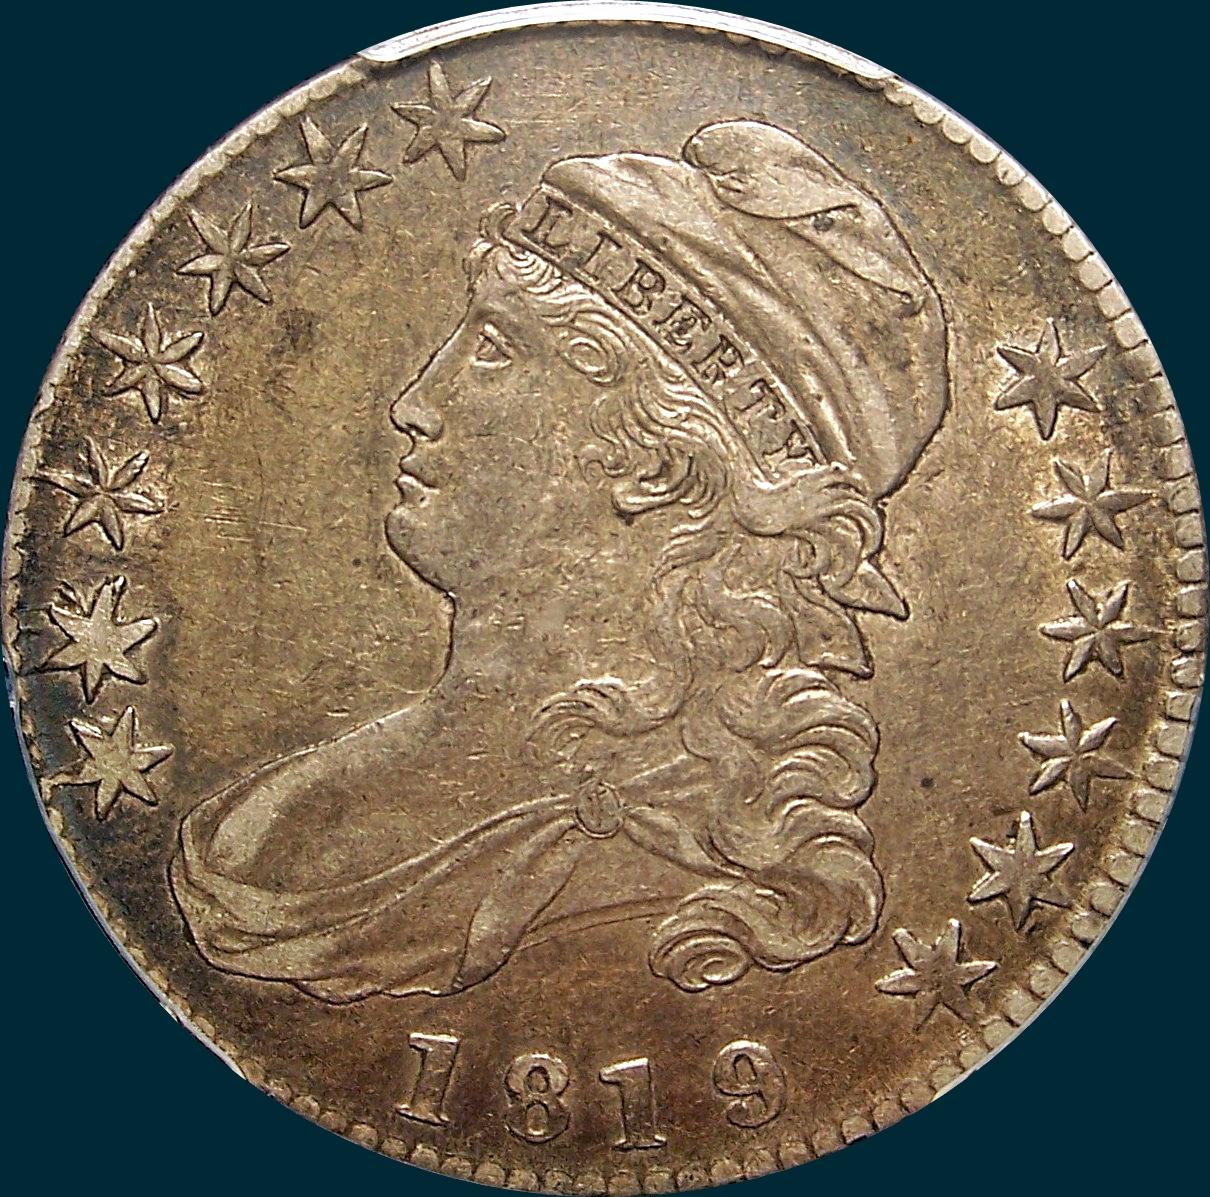 1819, O-104, Large 9 over 8, Capped Bust, Half Dollar